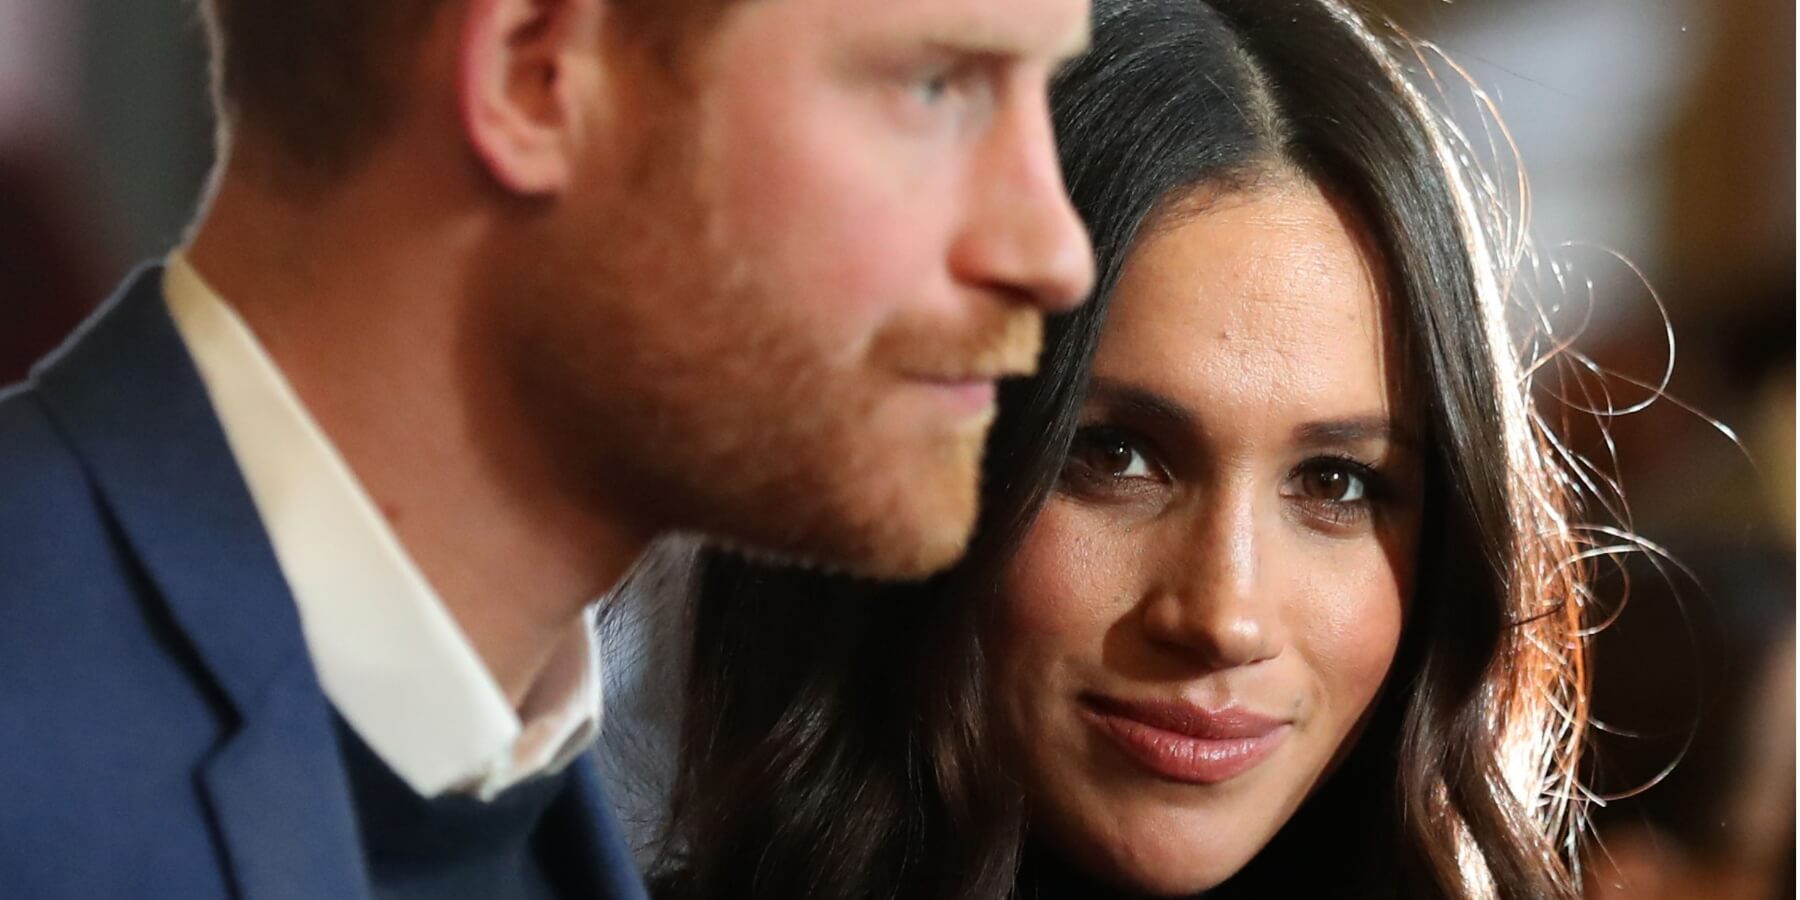 Prince Harry and Meghan Markle photographed at a reception for young people at the Palace of Holyroodhouse on February 13, 2018 in Edinburgh, Scotland.